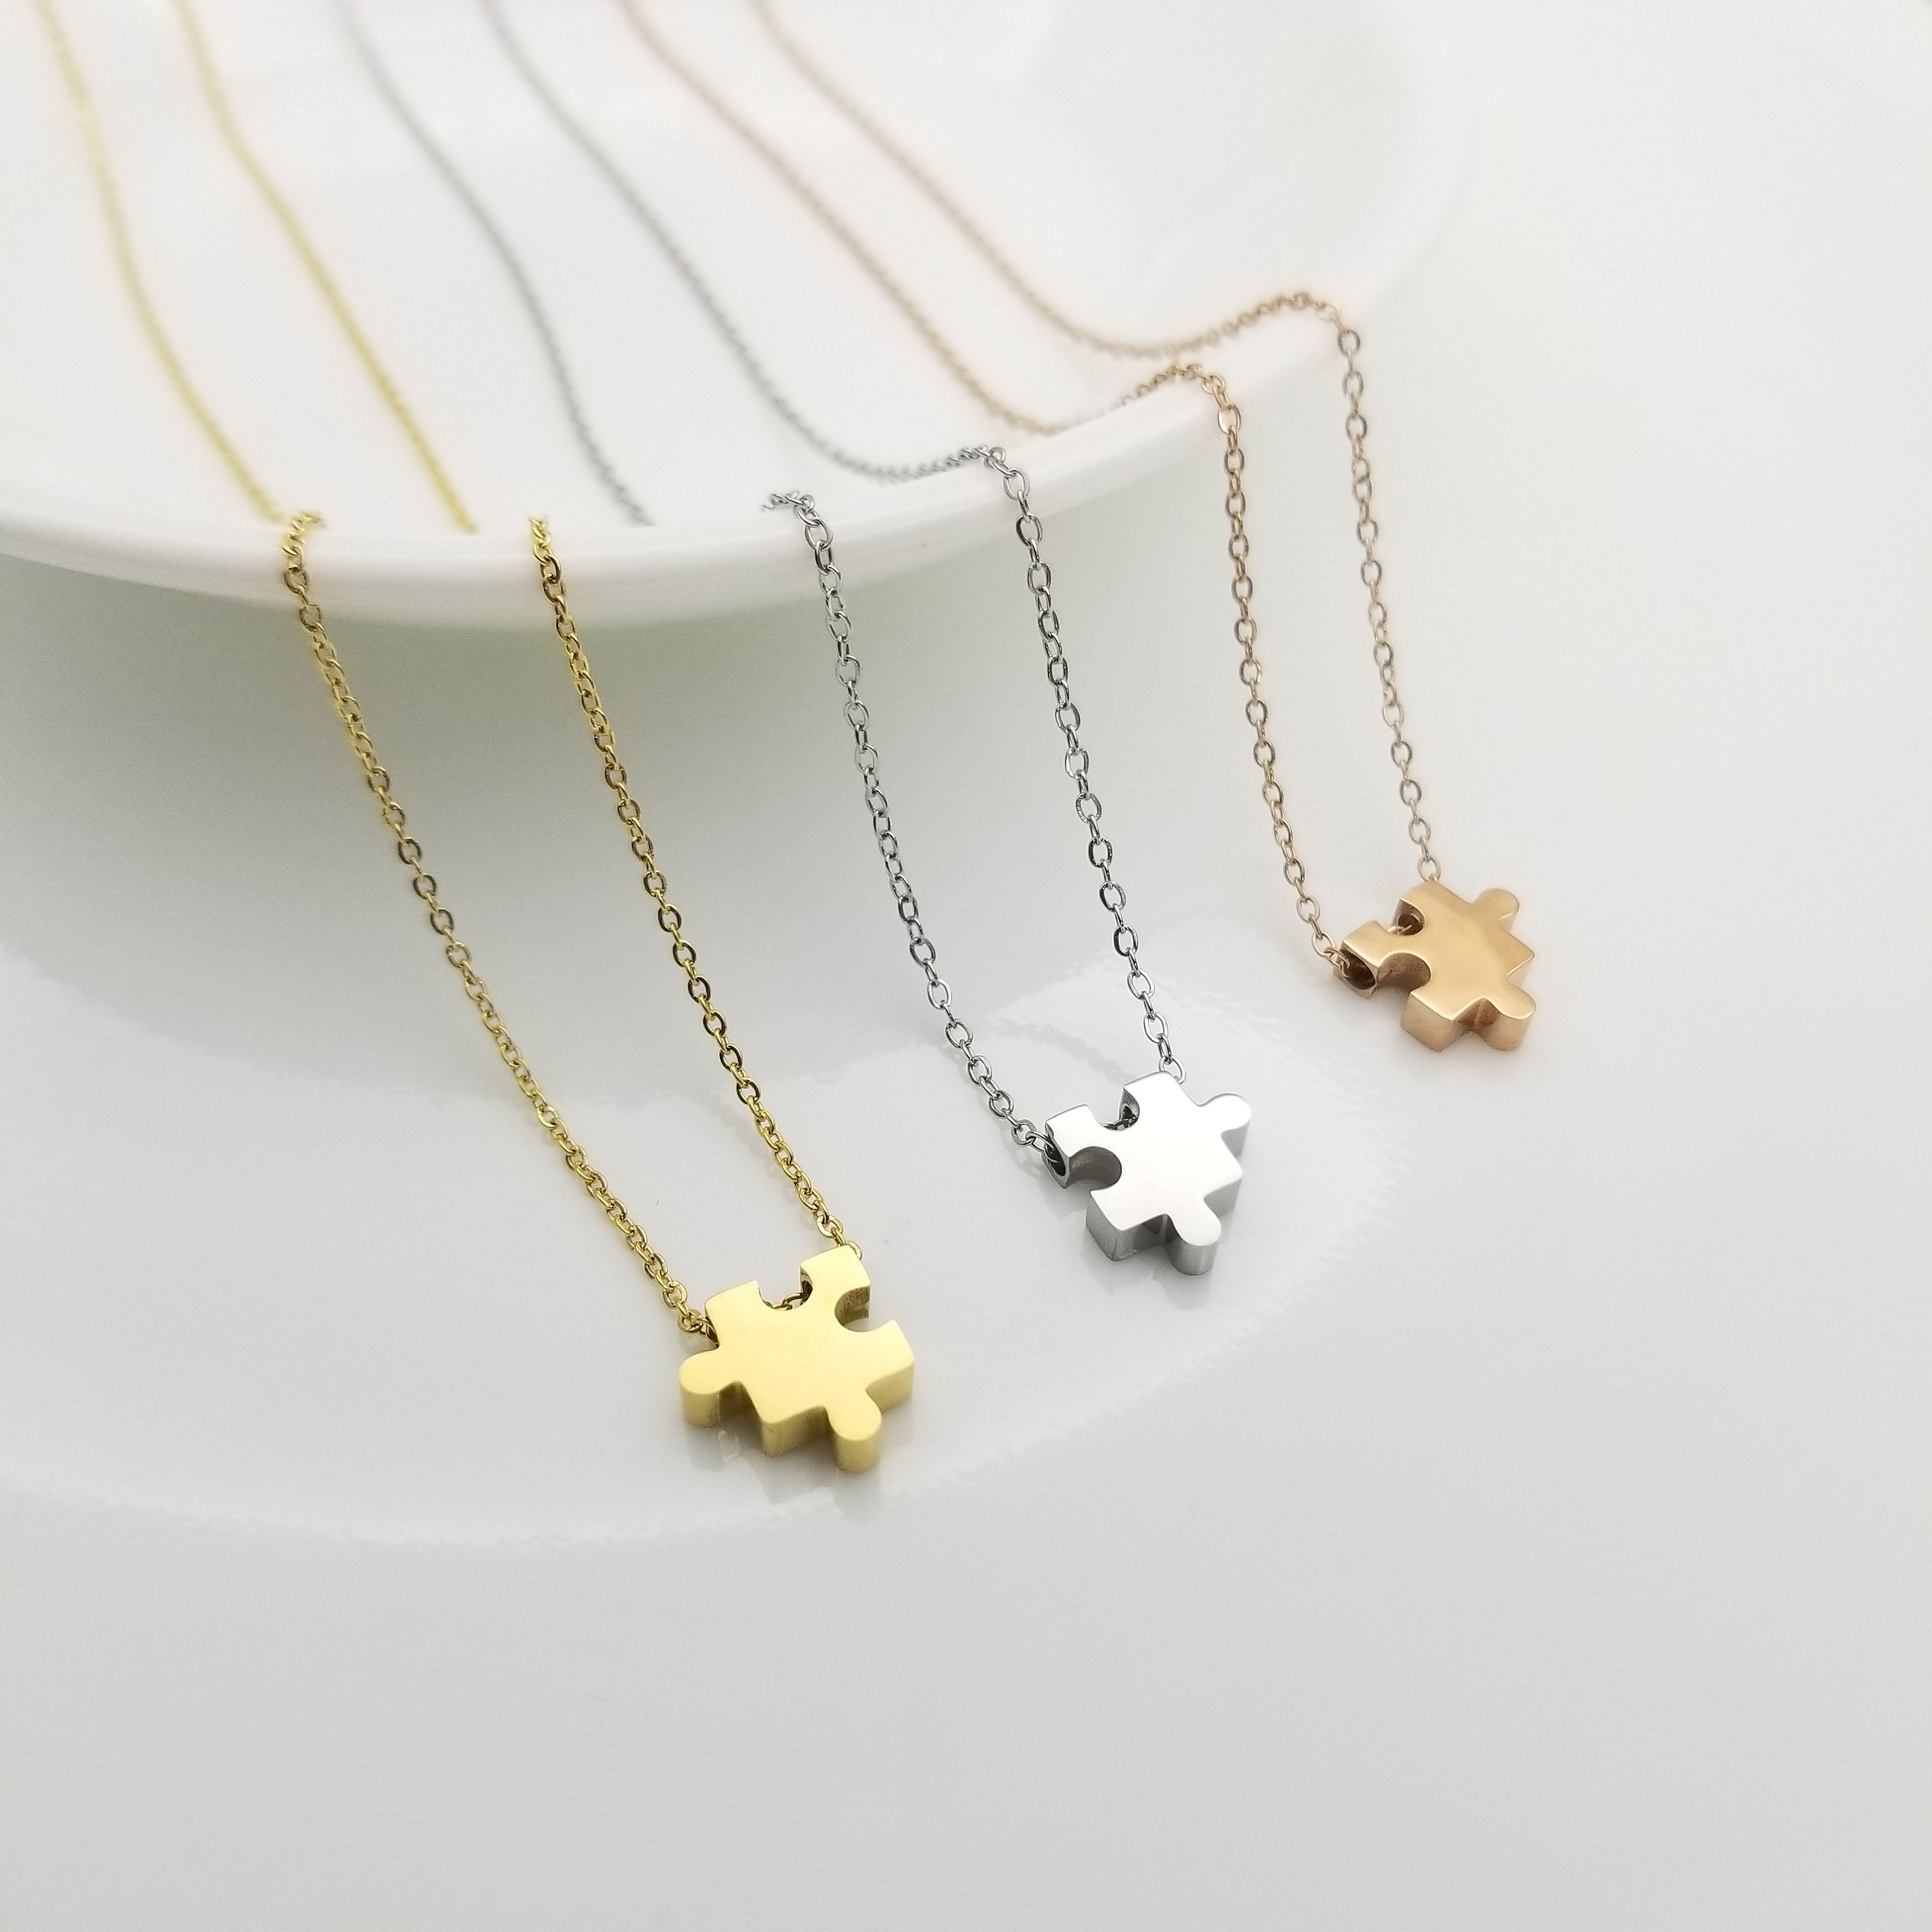 Celebrating Friendship with Meaningful Necklaces - Mintly